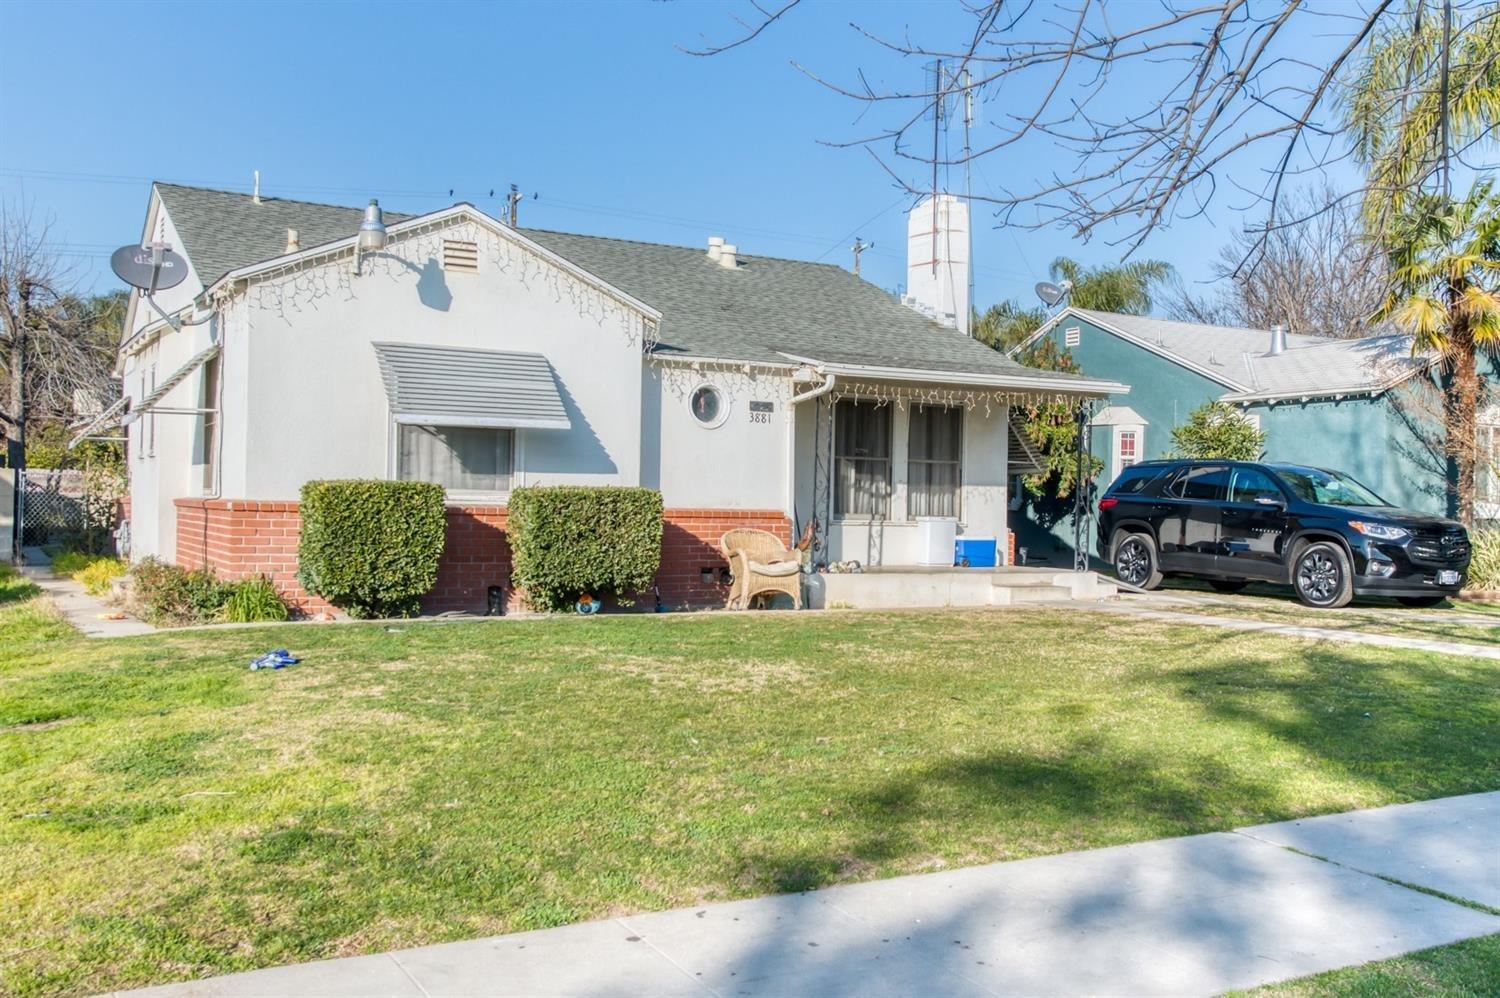 Photo of 3881 E Orleans Ave in Fresno, CA